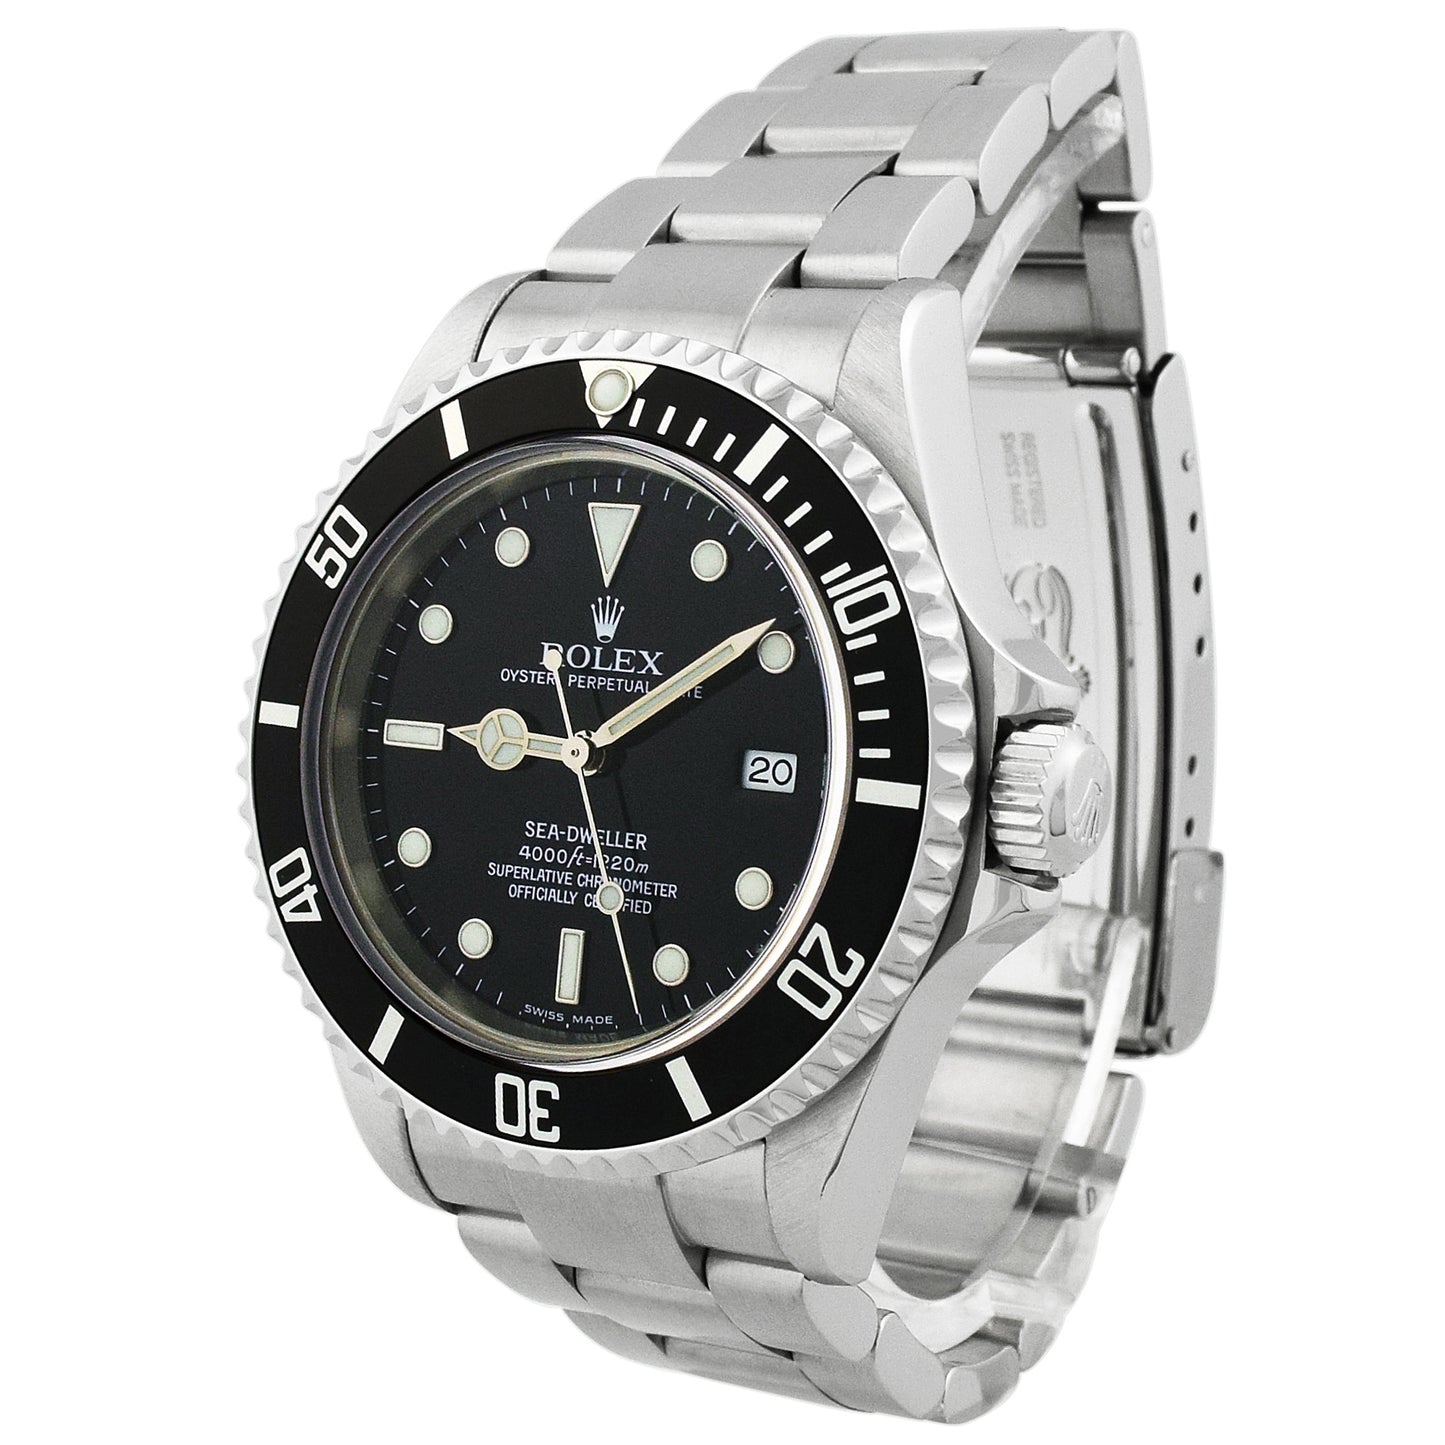 Rolex Sea Dweller 4000 Stainless Steel 40mm Black Dot Dial Watch Reference #: 16600